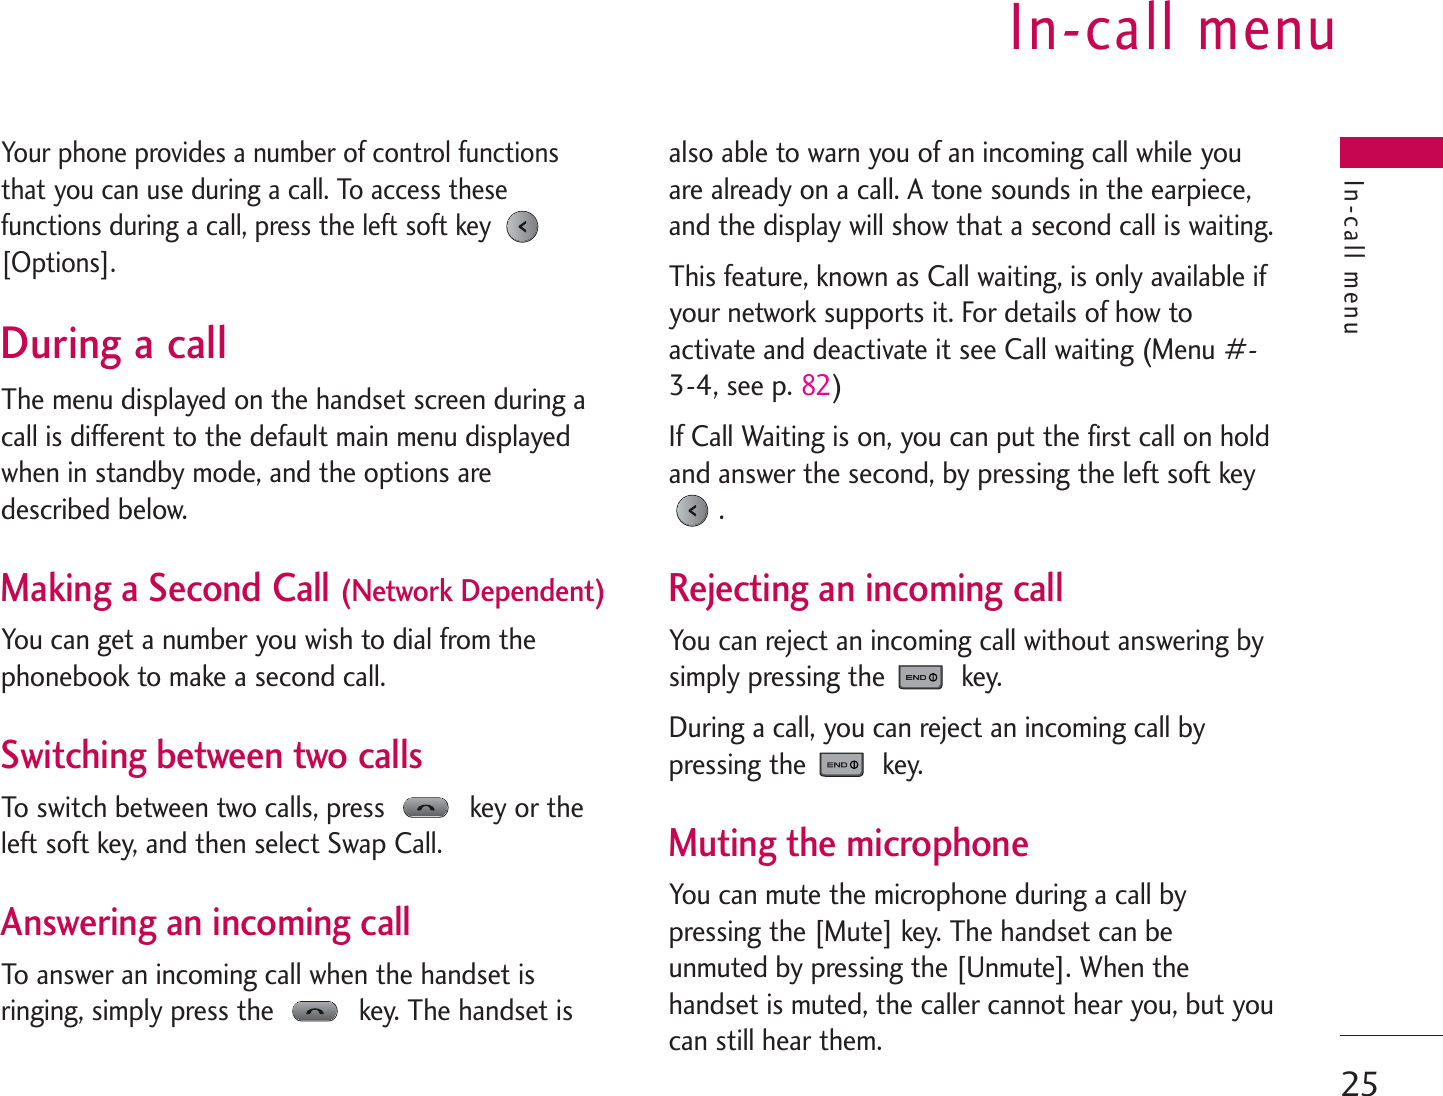 In-call menu25In-call menuYour phone provides a number of control functionsthat you can use during a call. To access thesefunctions during a call, press the left soft key [Options].During a callThe menu displayed on the handset screen during acall is different to the default main menu displayedwhen in standby mode, and the options aredescribed below.Making a Second Call (Network Dependent)You can get a number you wish to dial from thephonebook to make a second call. Switching between two callsTo switch between two calls, press  key or theleft soft key, and then select Swap Call.Answering an incoming callTo answer an incoming call when the handset isringing, simply press the  key. The handset isalso able to warn you of an incoming call while youare already on a call. A tone sounds in the earpiece,and the display will show that a second call is waiting.This feature, known as Call waiting, is only available ifyour network supports it. For details of how toactivate and deactivate it see Call waiting (Menu #-3-4, see p. 82) If Call Waiting is on, you can put the first call on holdand answer the second, by pressing the left soft key.Rejecting an incoming callYou can reject an incoming call without answering bysimply pressing the  key. During a call, you can reject an incoming call bypressing the  key.Muting the microphoneYou can mute the microphone during a call bypressing the [Mute] key. The handset can beunmuted by pressing the [Unmute]. When thehandset is muted, the caller cannot hear you, but youcan still hear them.